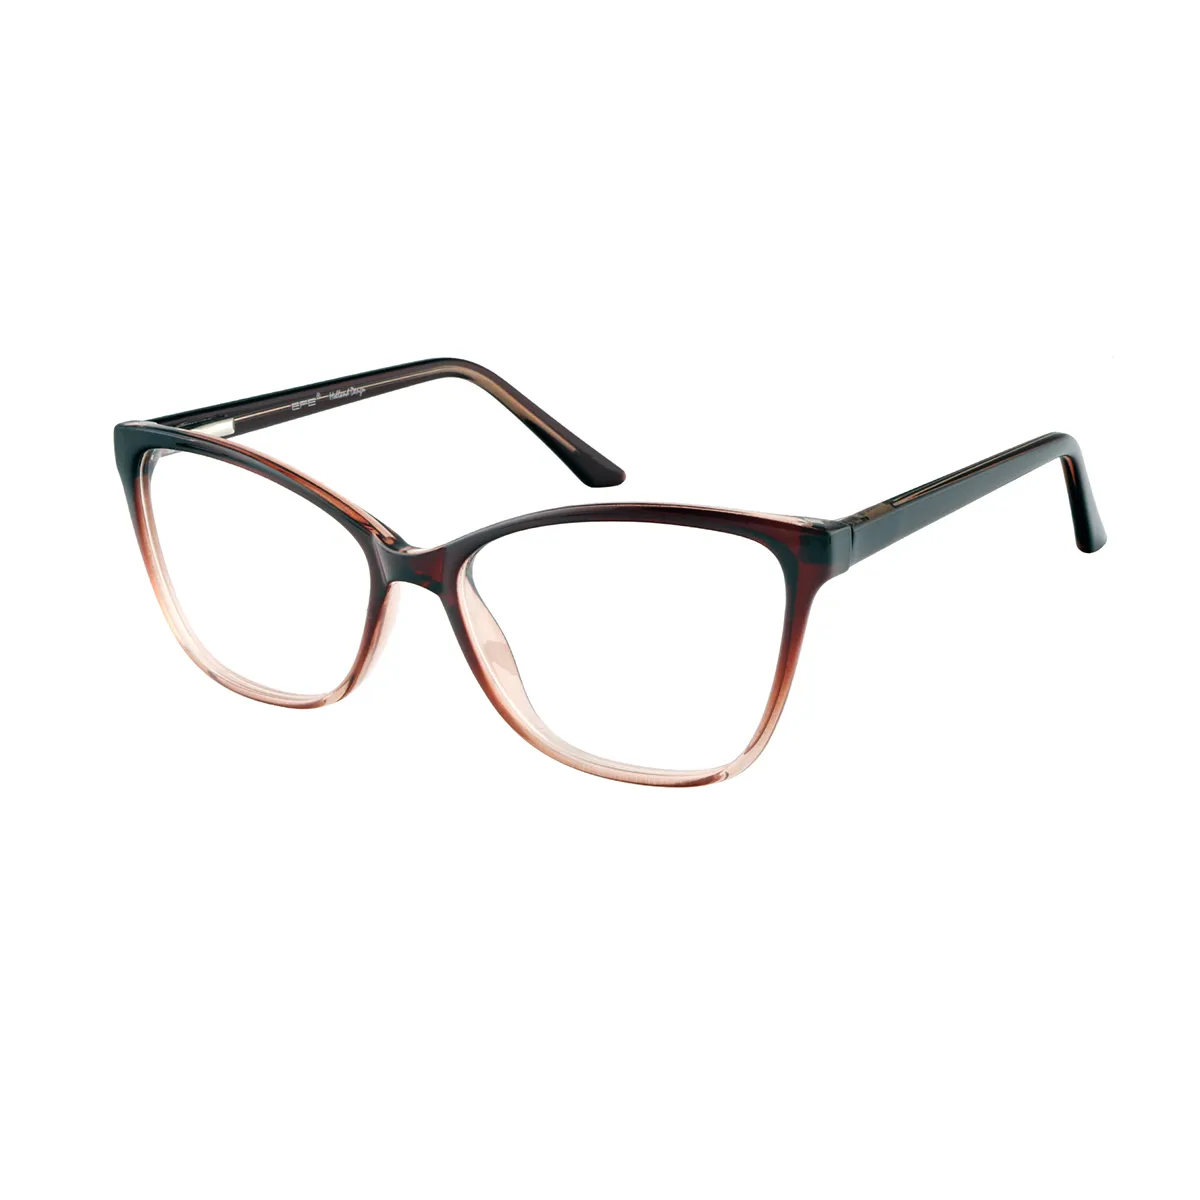 McElroy - Square Brown Glasses for Women